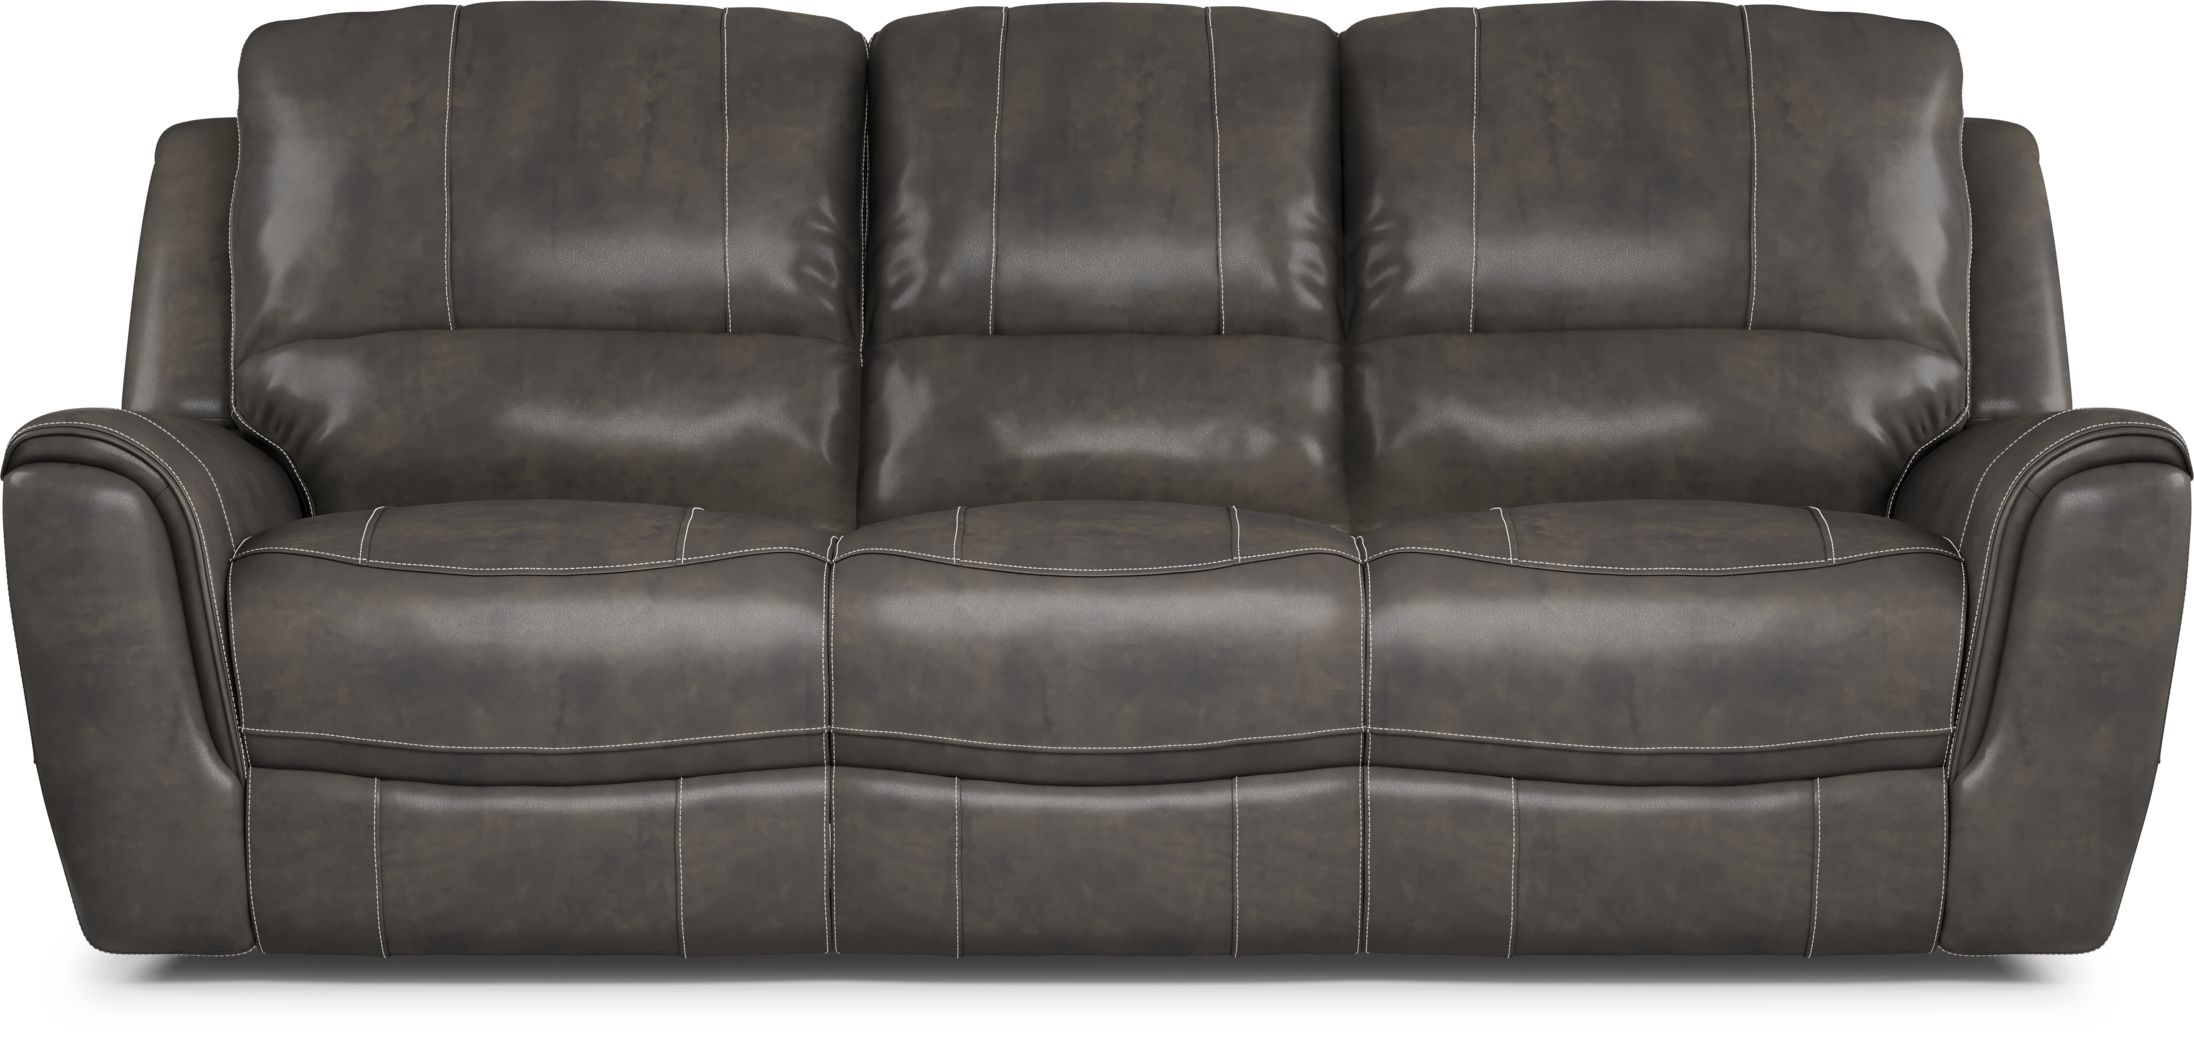 rooms to go gray leather reclining sofa